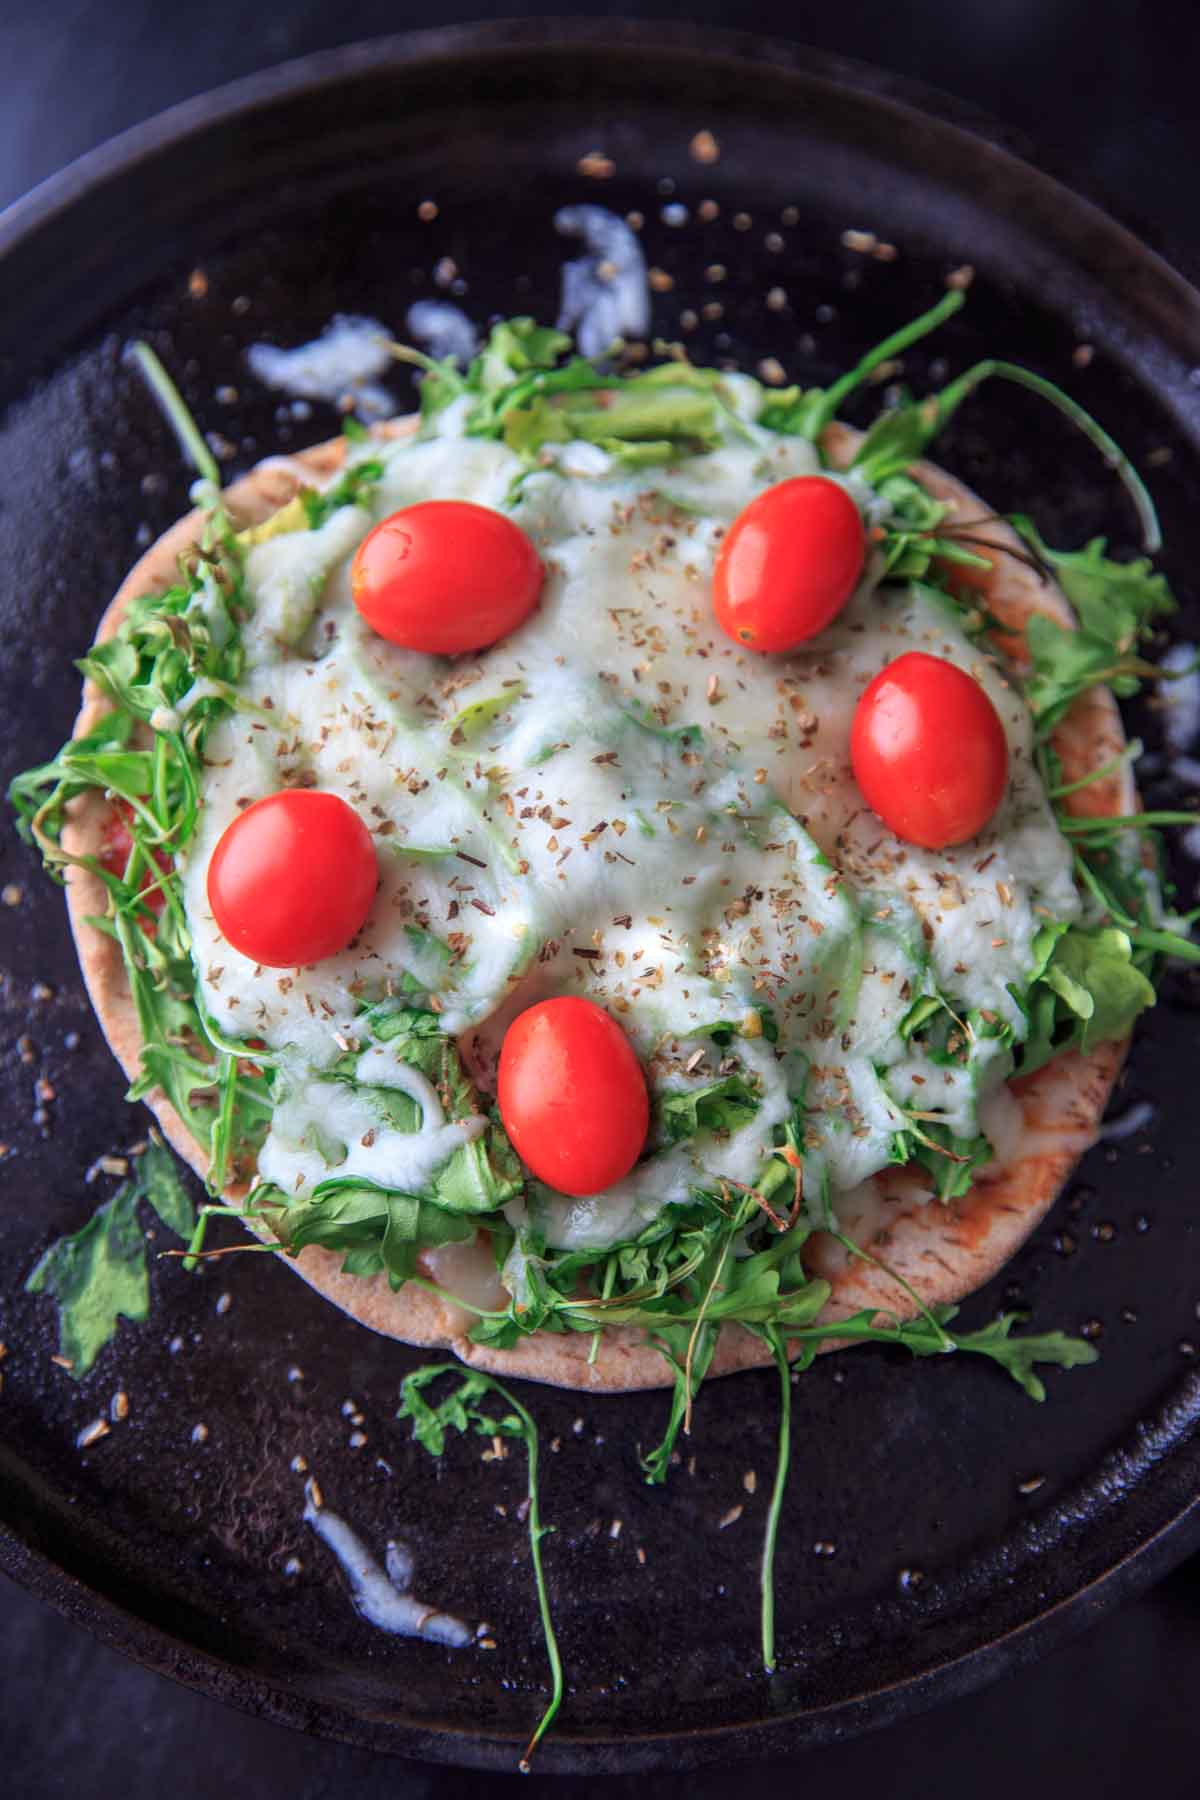 Quick and easy pita pizza recipe that you can make in the oven, microwave, or even on the grill! Fast lunch or dinner option that is completely customizable and faster than delivery.